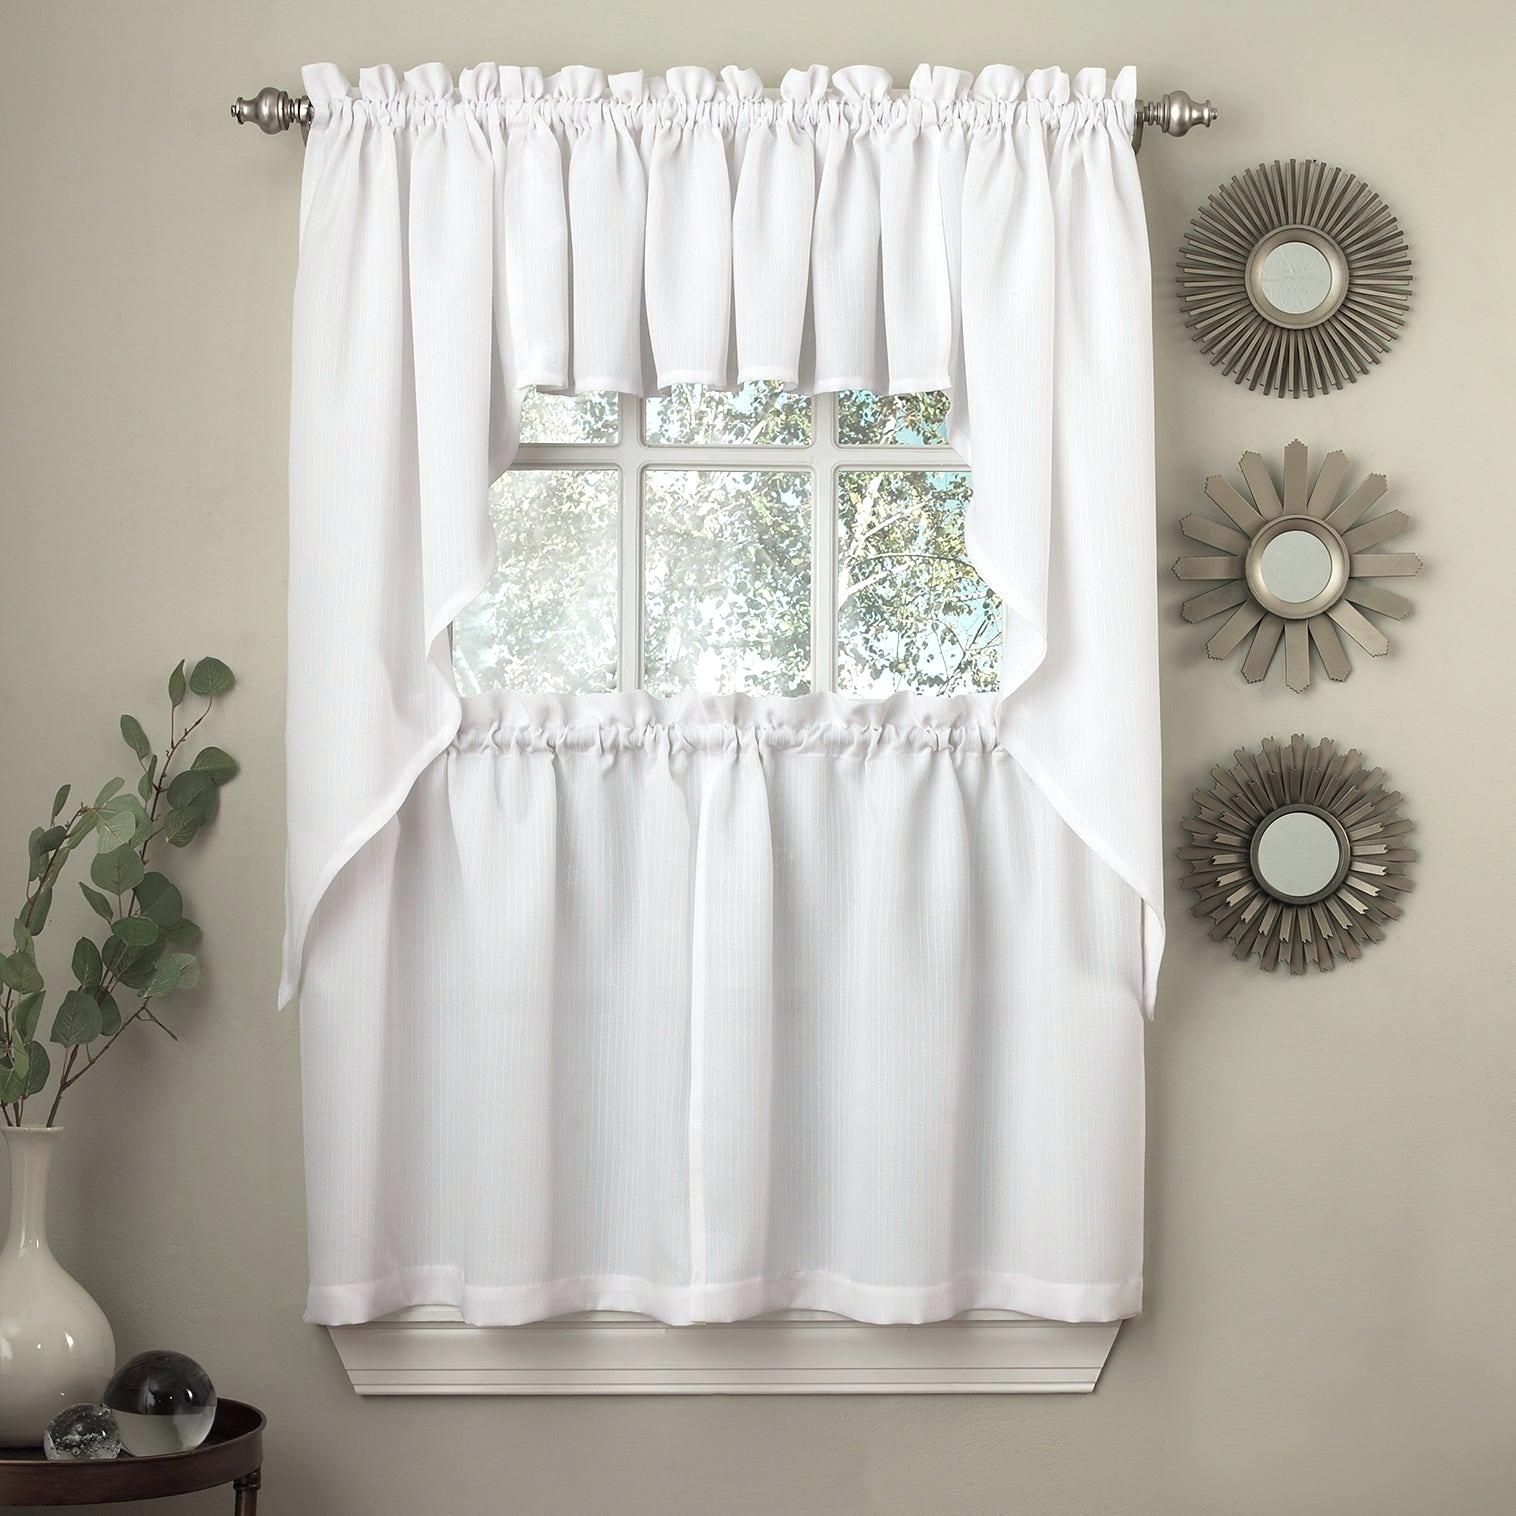 Curtain Tiers – Churubuscochamber With White Knit Lace Bird Motif Window Curtain Tiers (View 20 of 20)